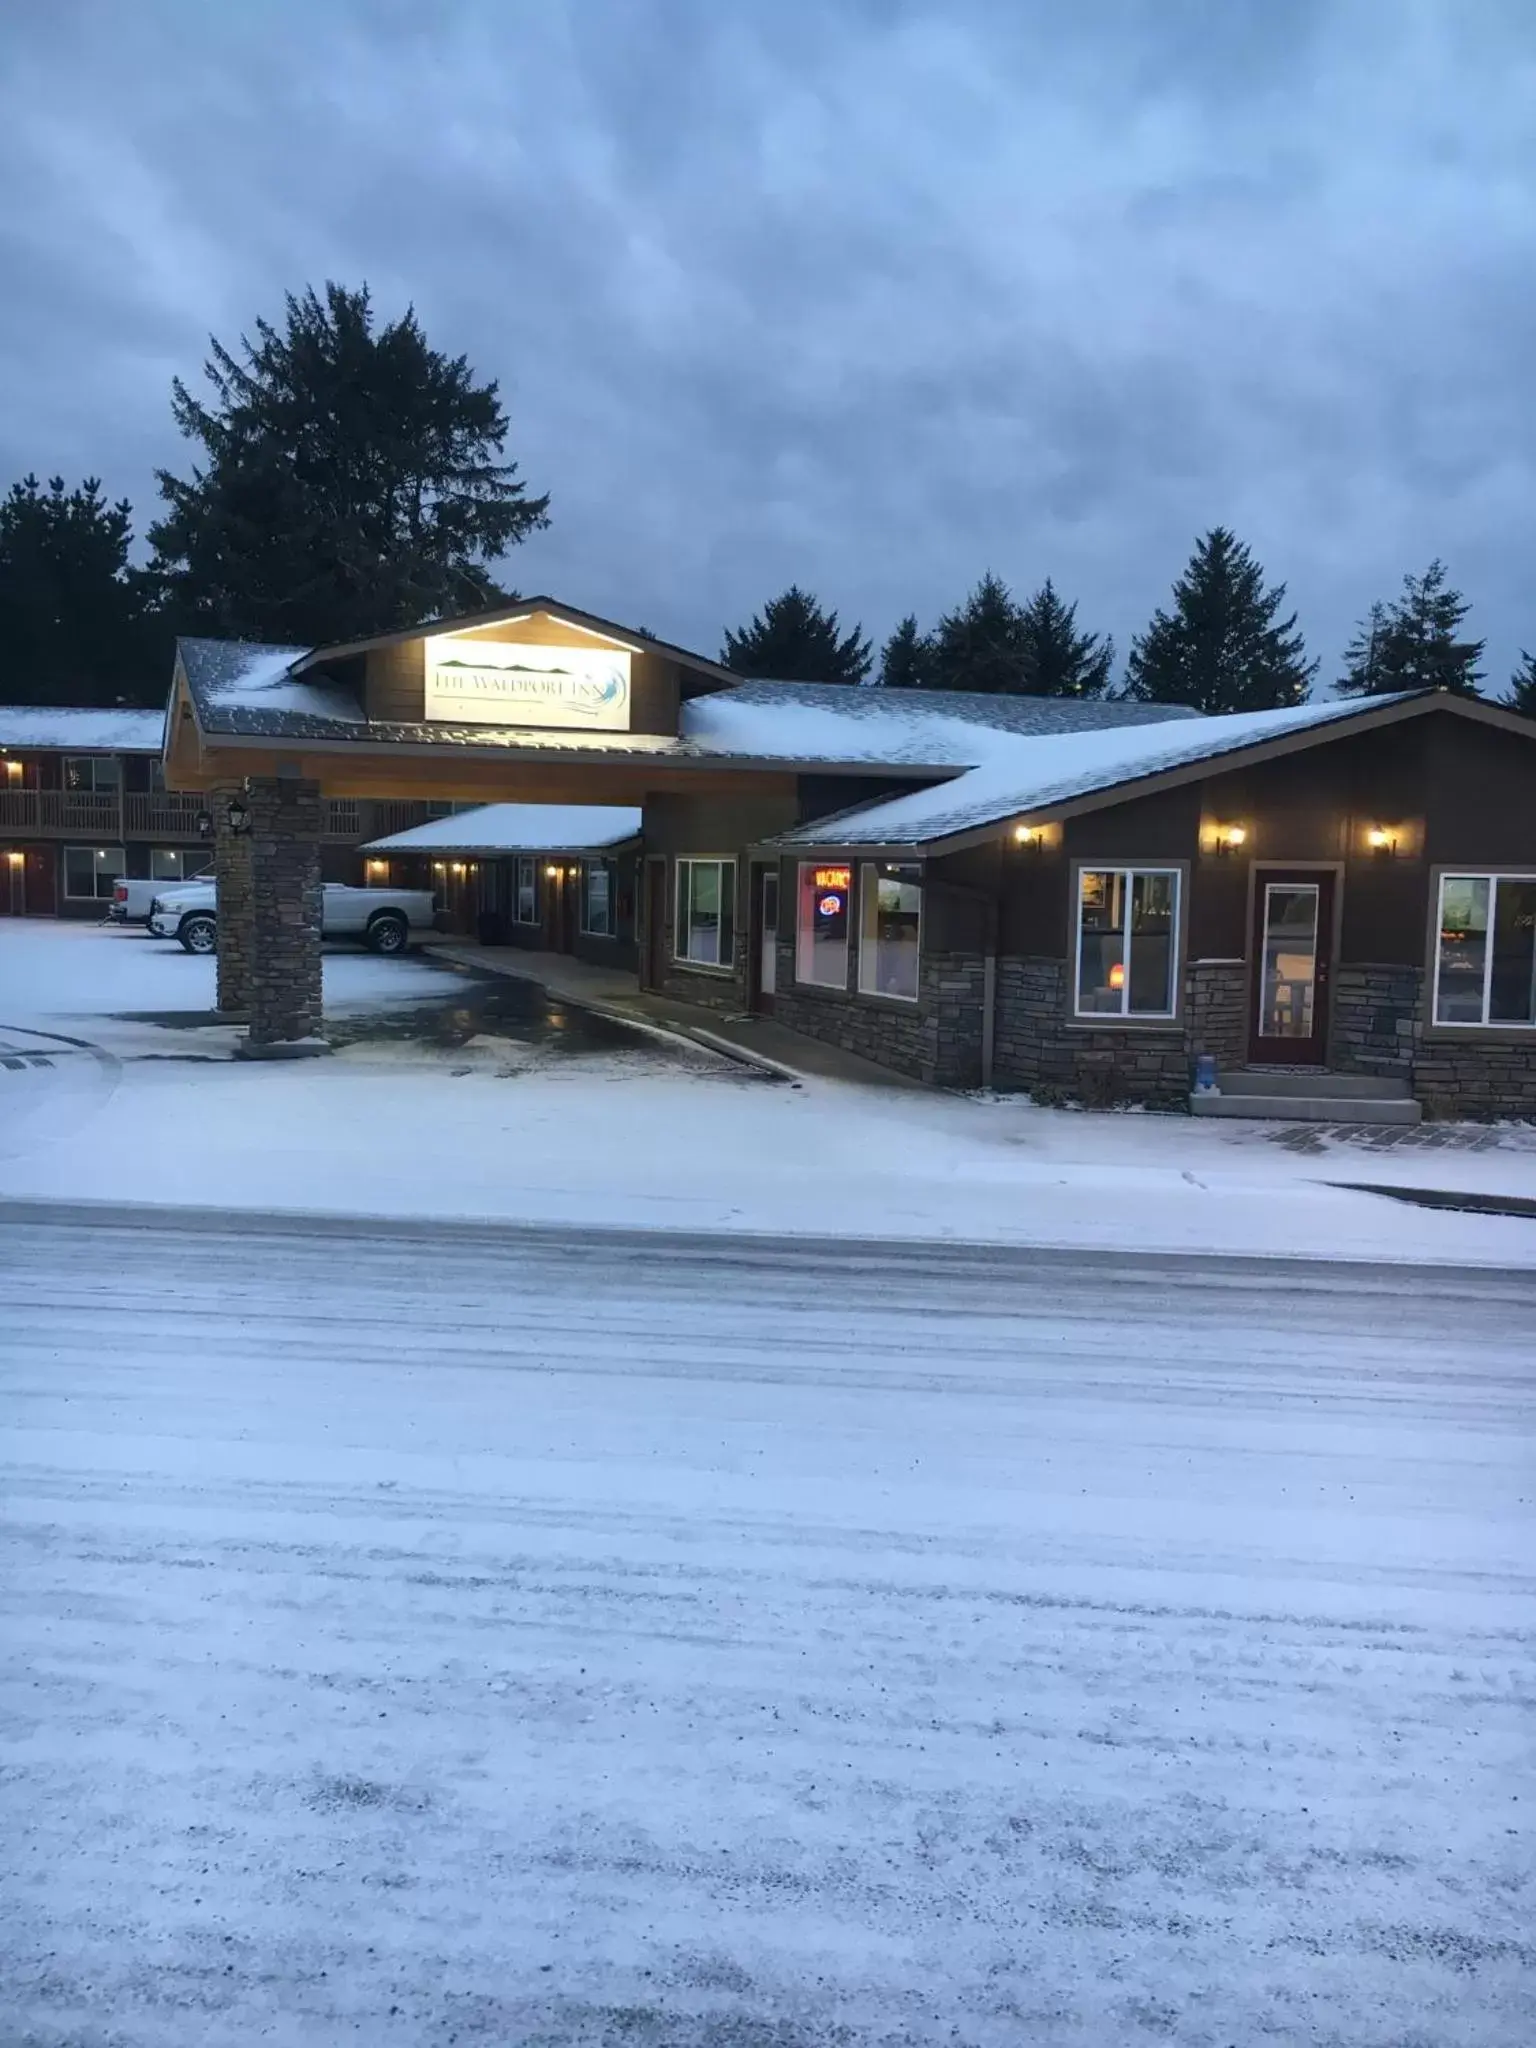 Property building, Winter in The Waldport Inn